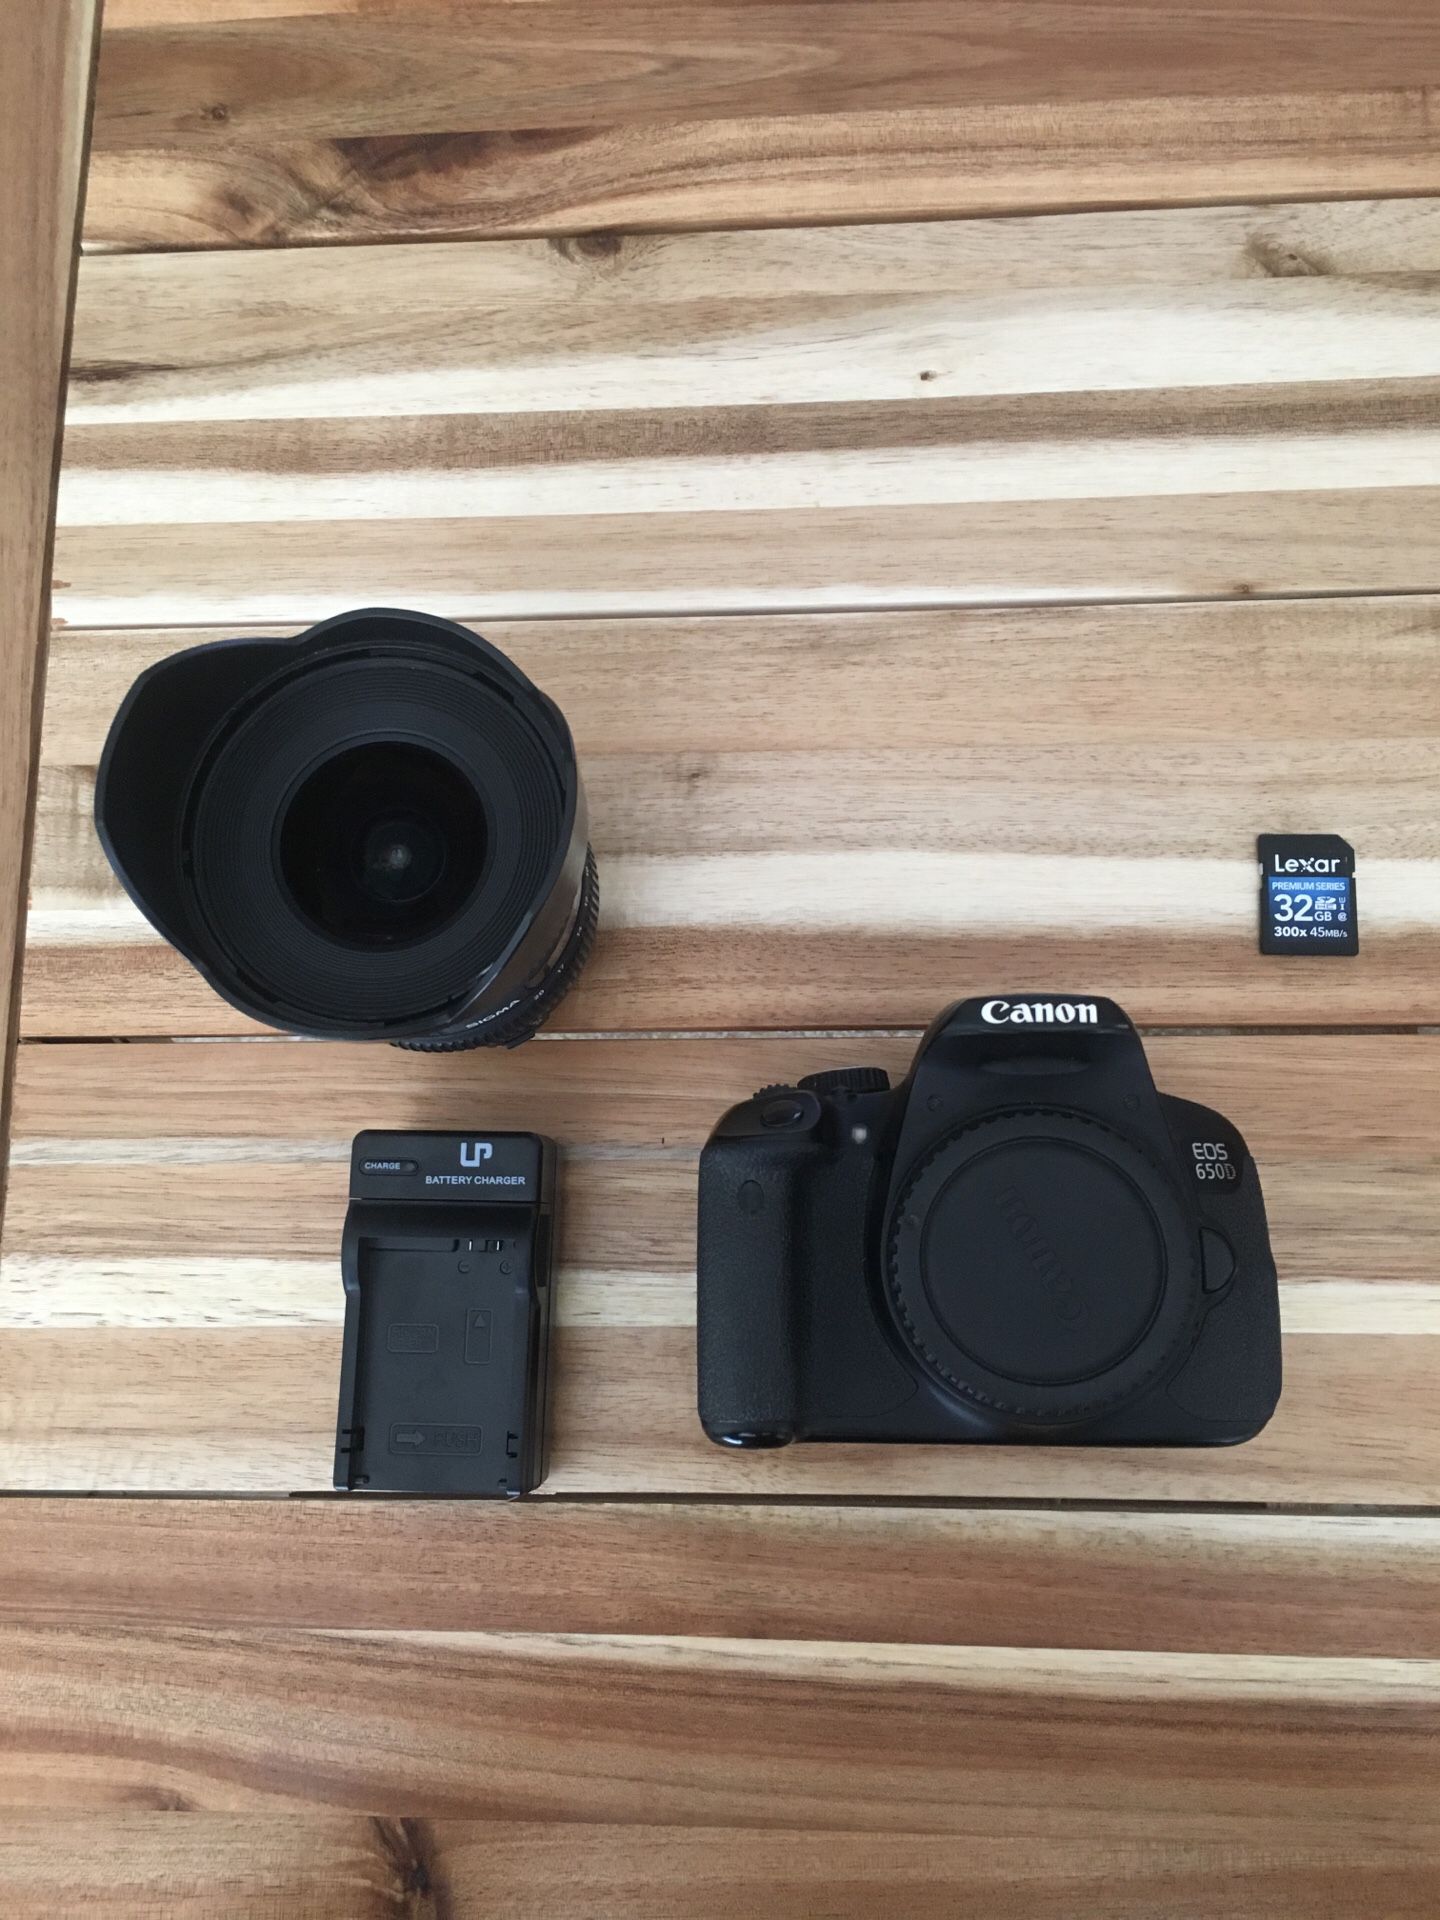 Canon t4i/eos 650D with sigma 10-20mm